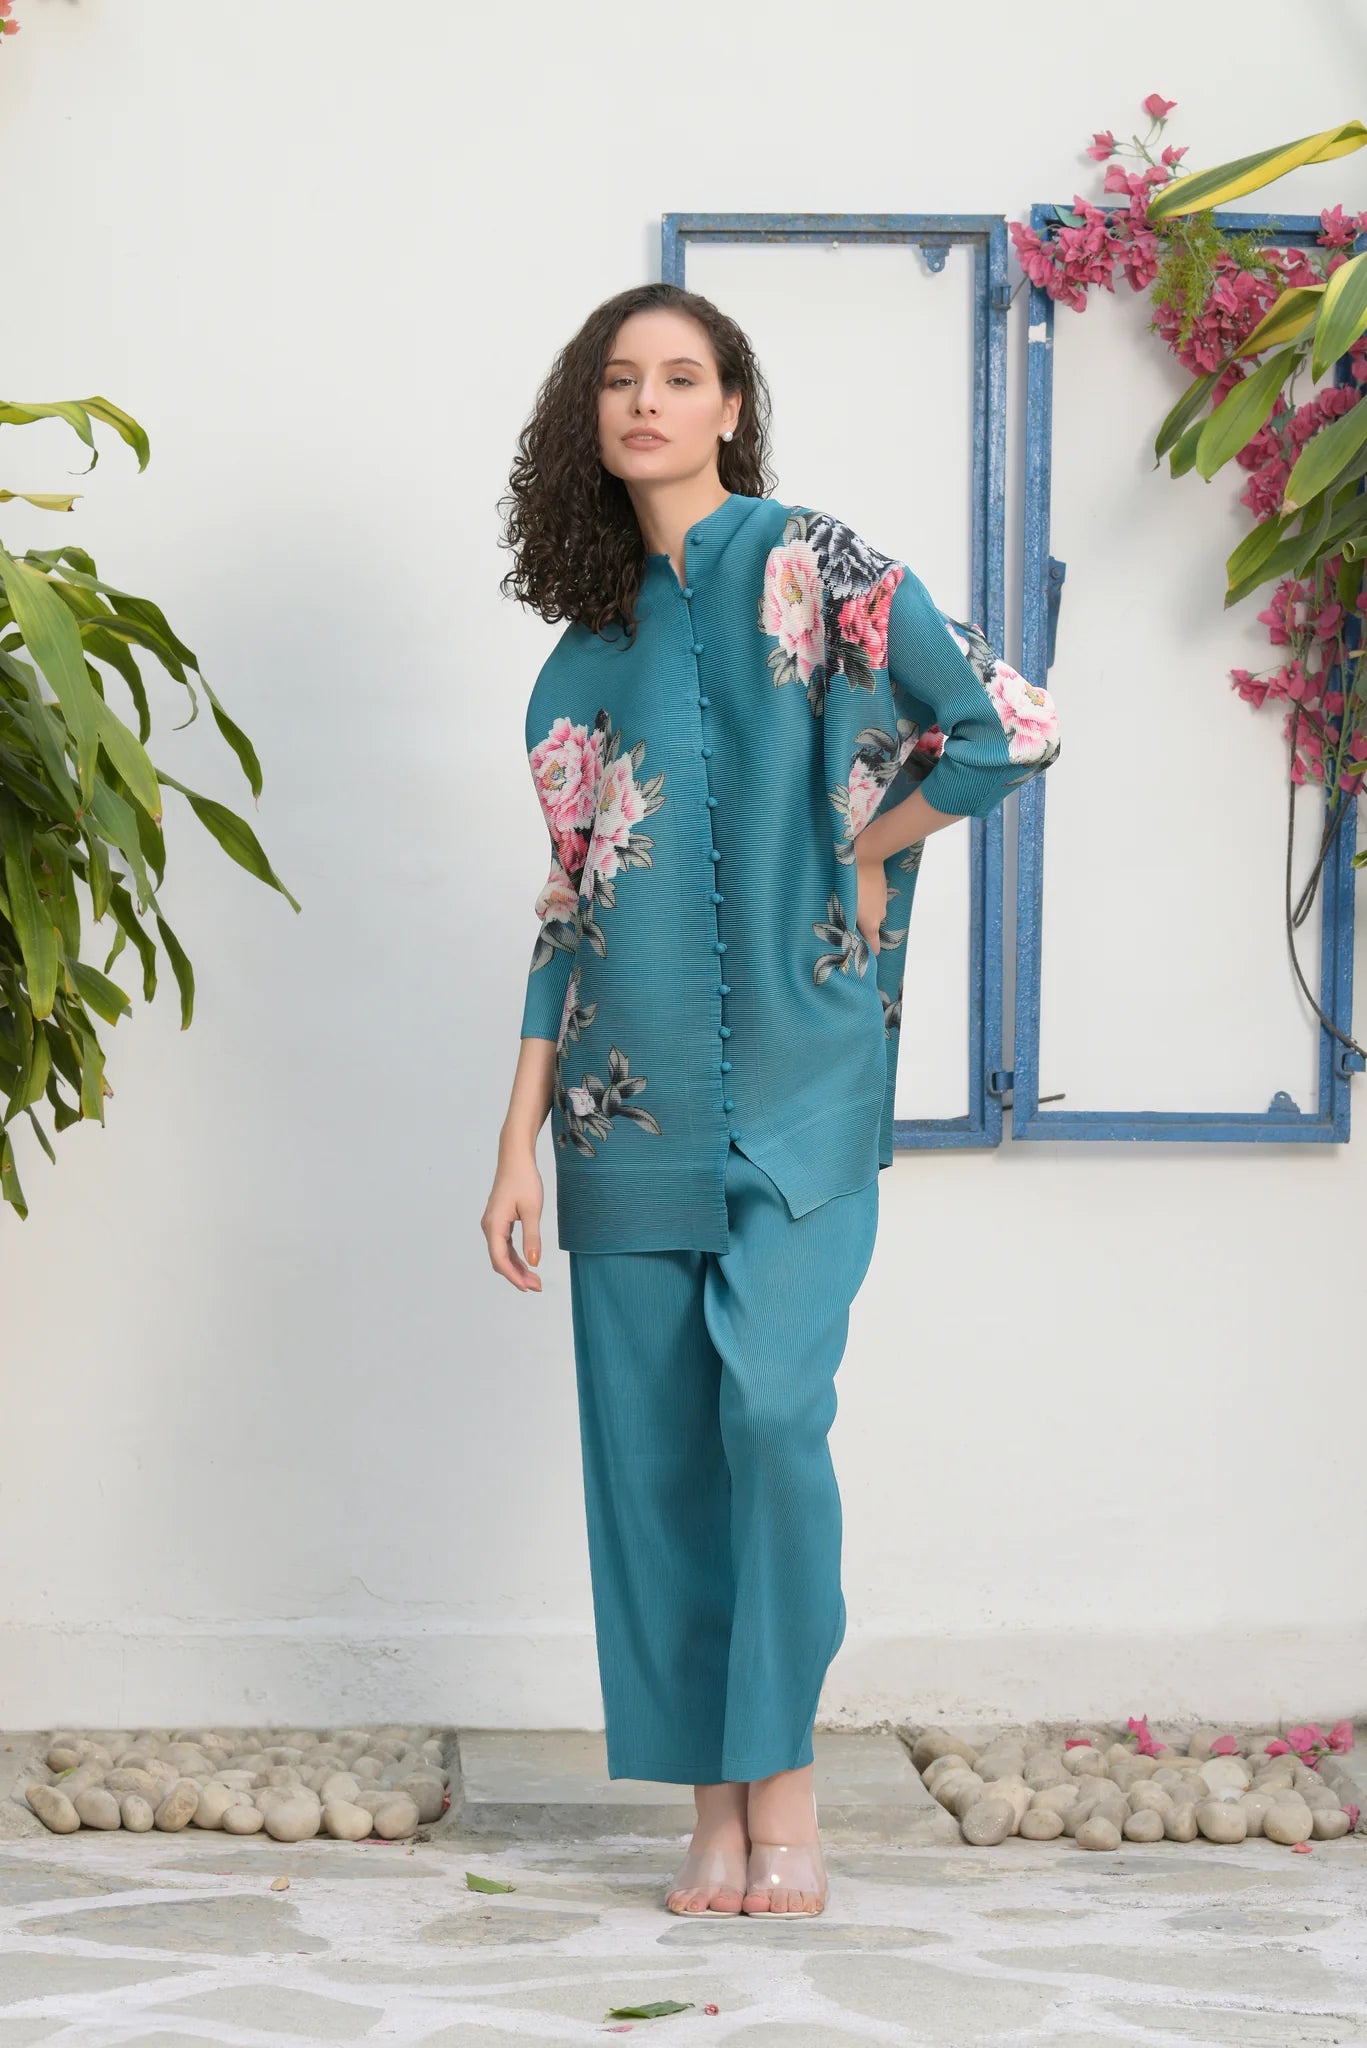 Image of This FAIRLIE FLORAL SHIRT WITH PLEATED PANTS - TEAL set is designed with quality in mind. Its 100% polyester fabric is breathable, comfortable, and wrinkle-resistant. The pleated pants and floral shirt will keep you looking stylish and ready for any occasion.  From savoirfashions.com